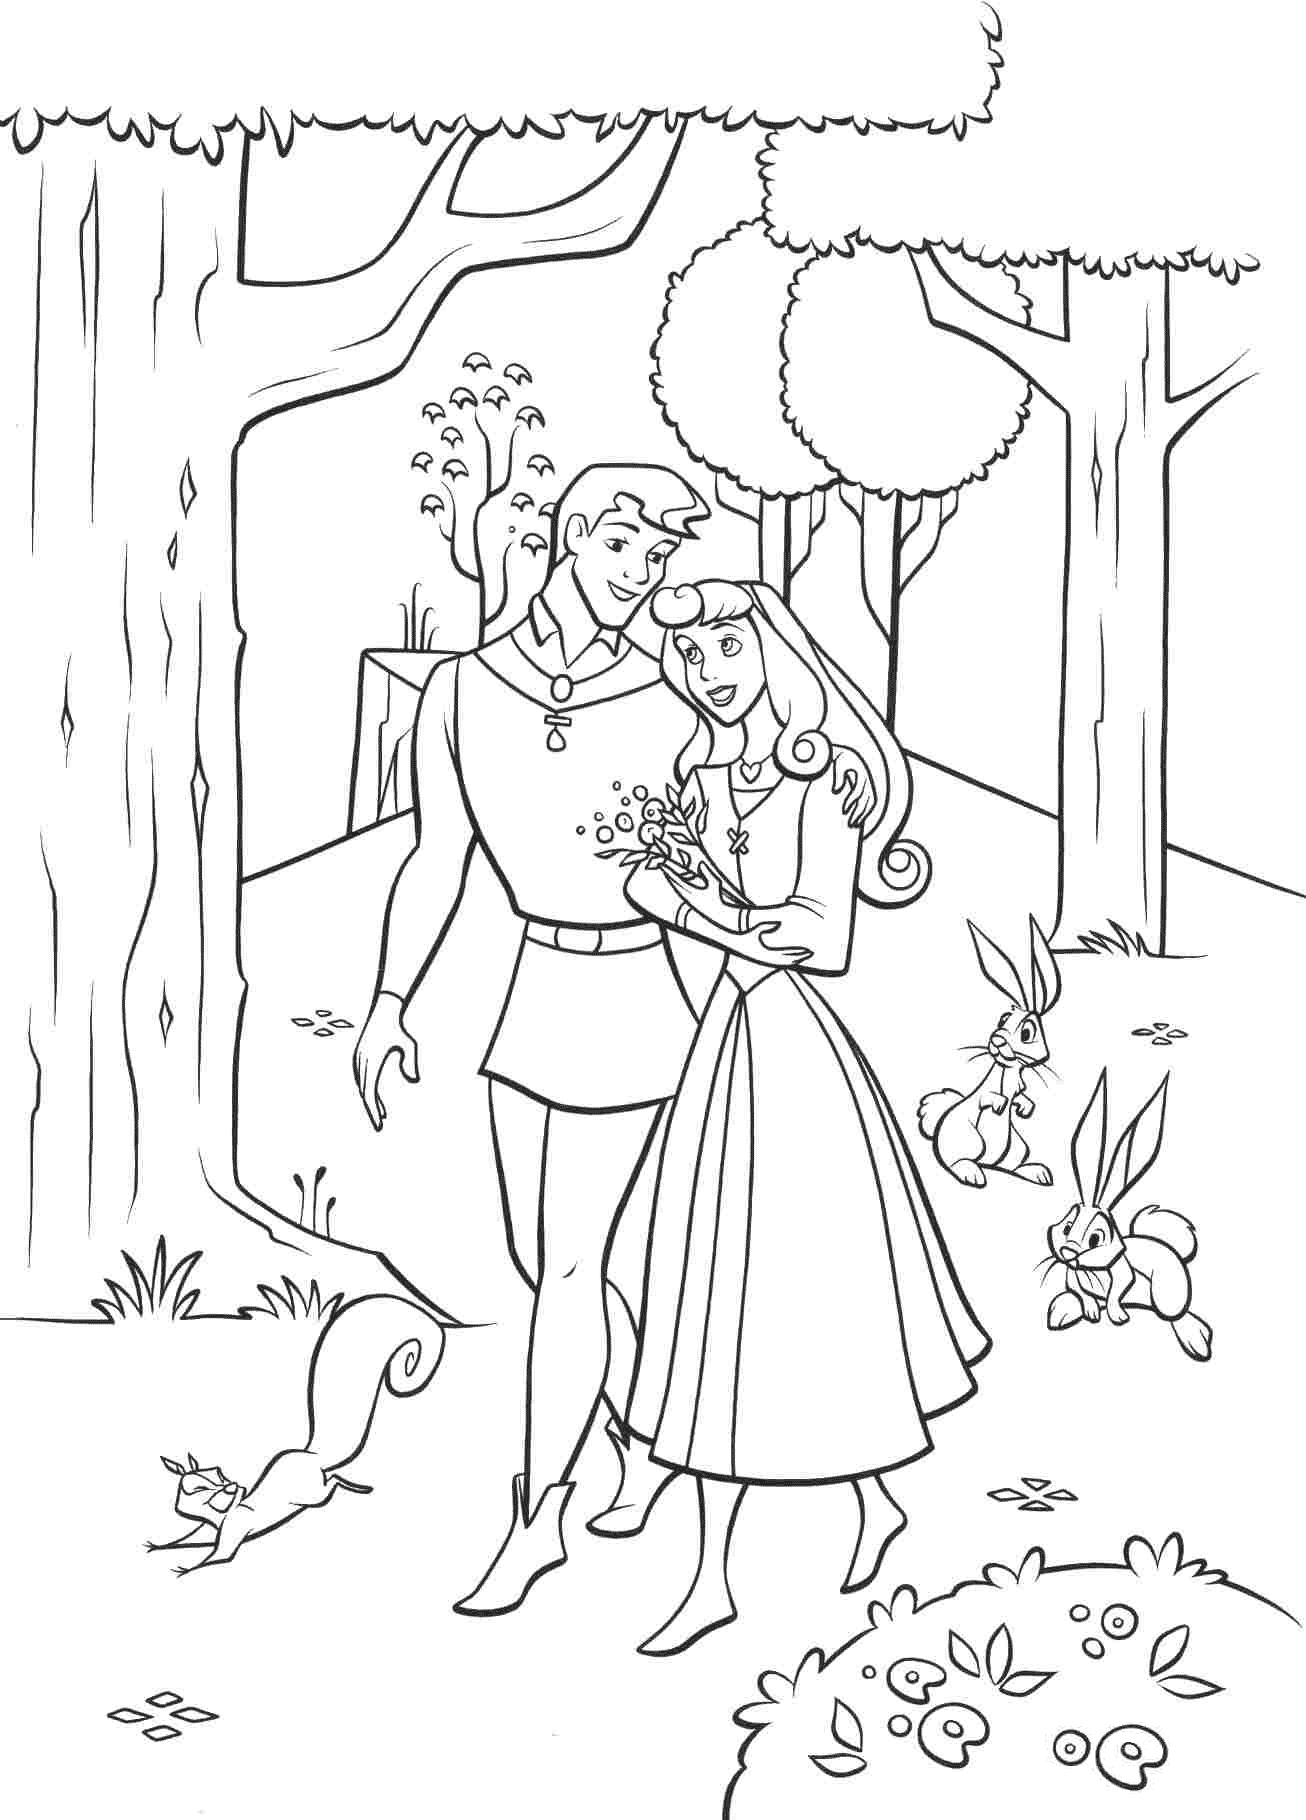 Phillip and Aurora are Falling in Love Coloring Pages   Sleeping ...